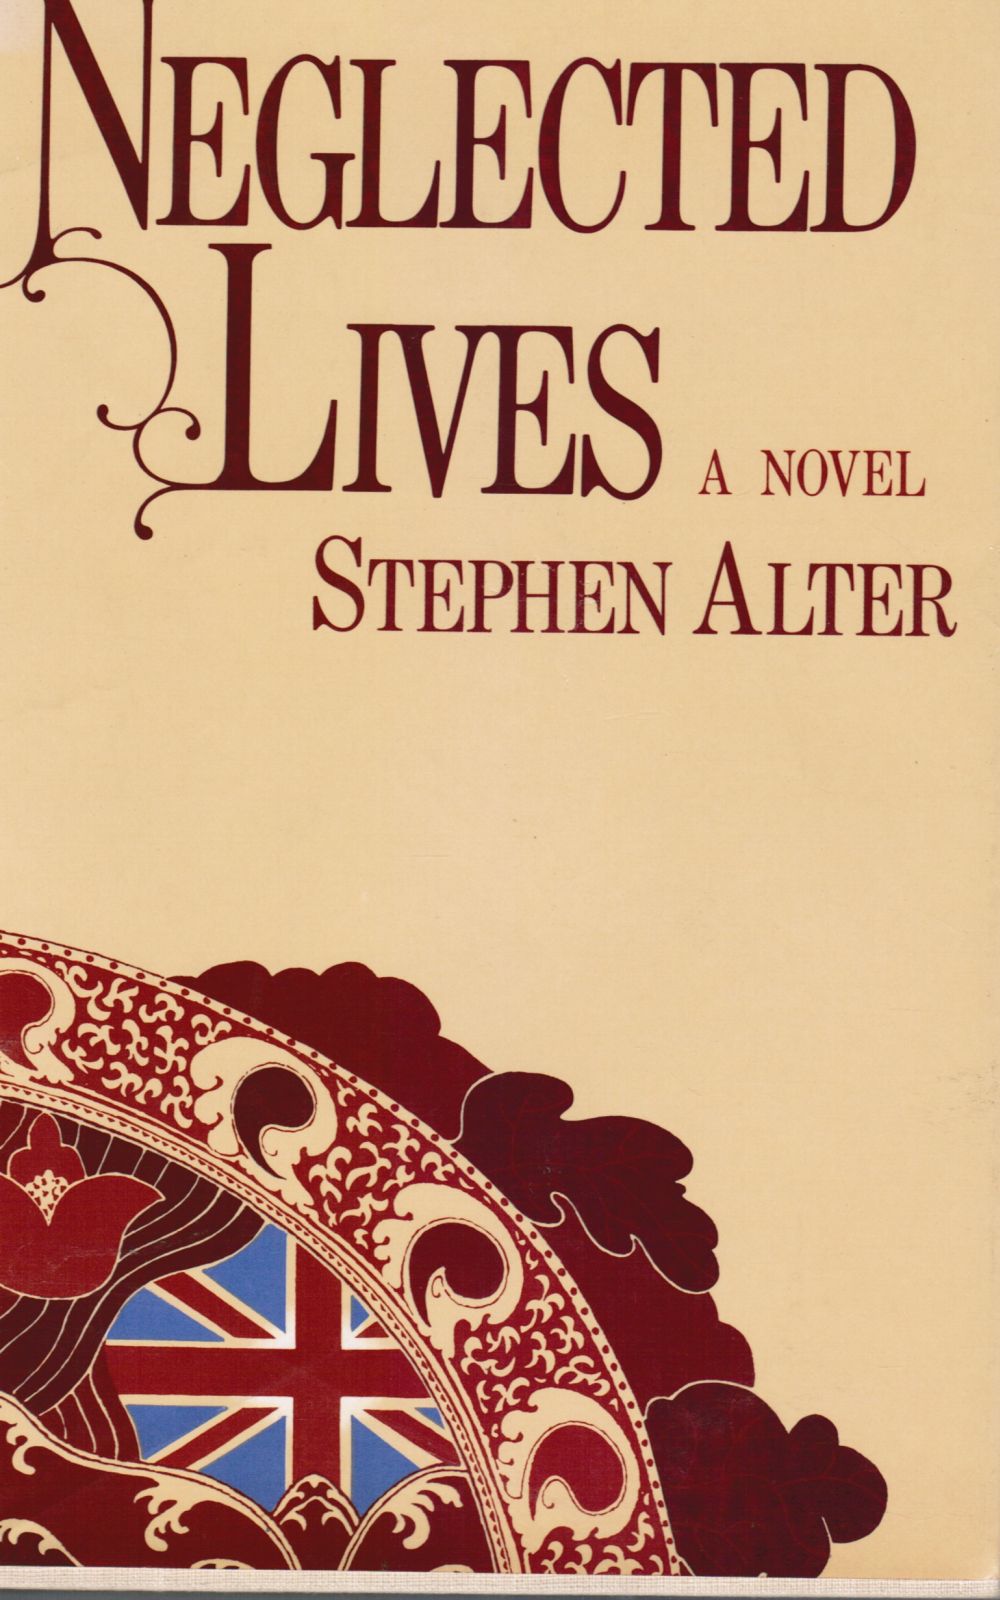 ALTER, STEPHEN - Neglected Lives